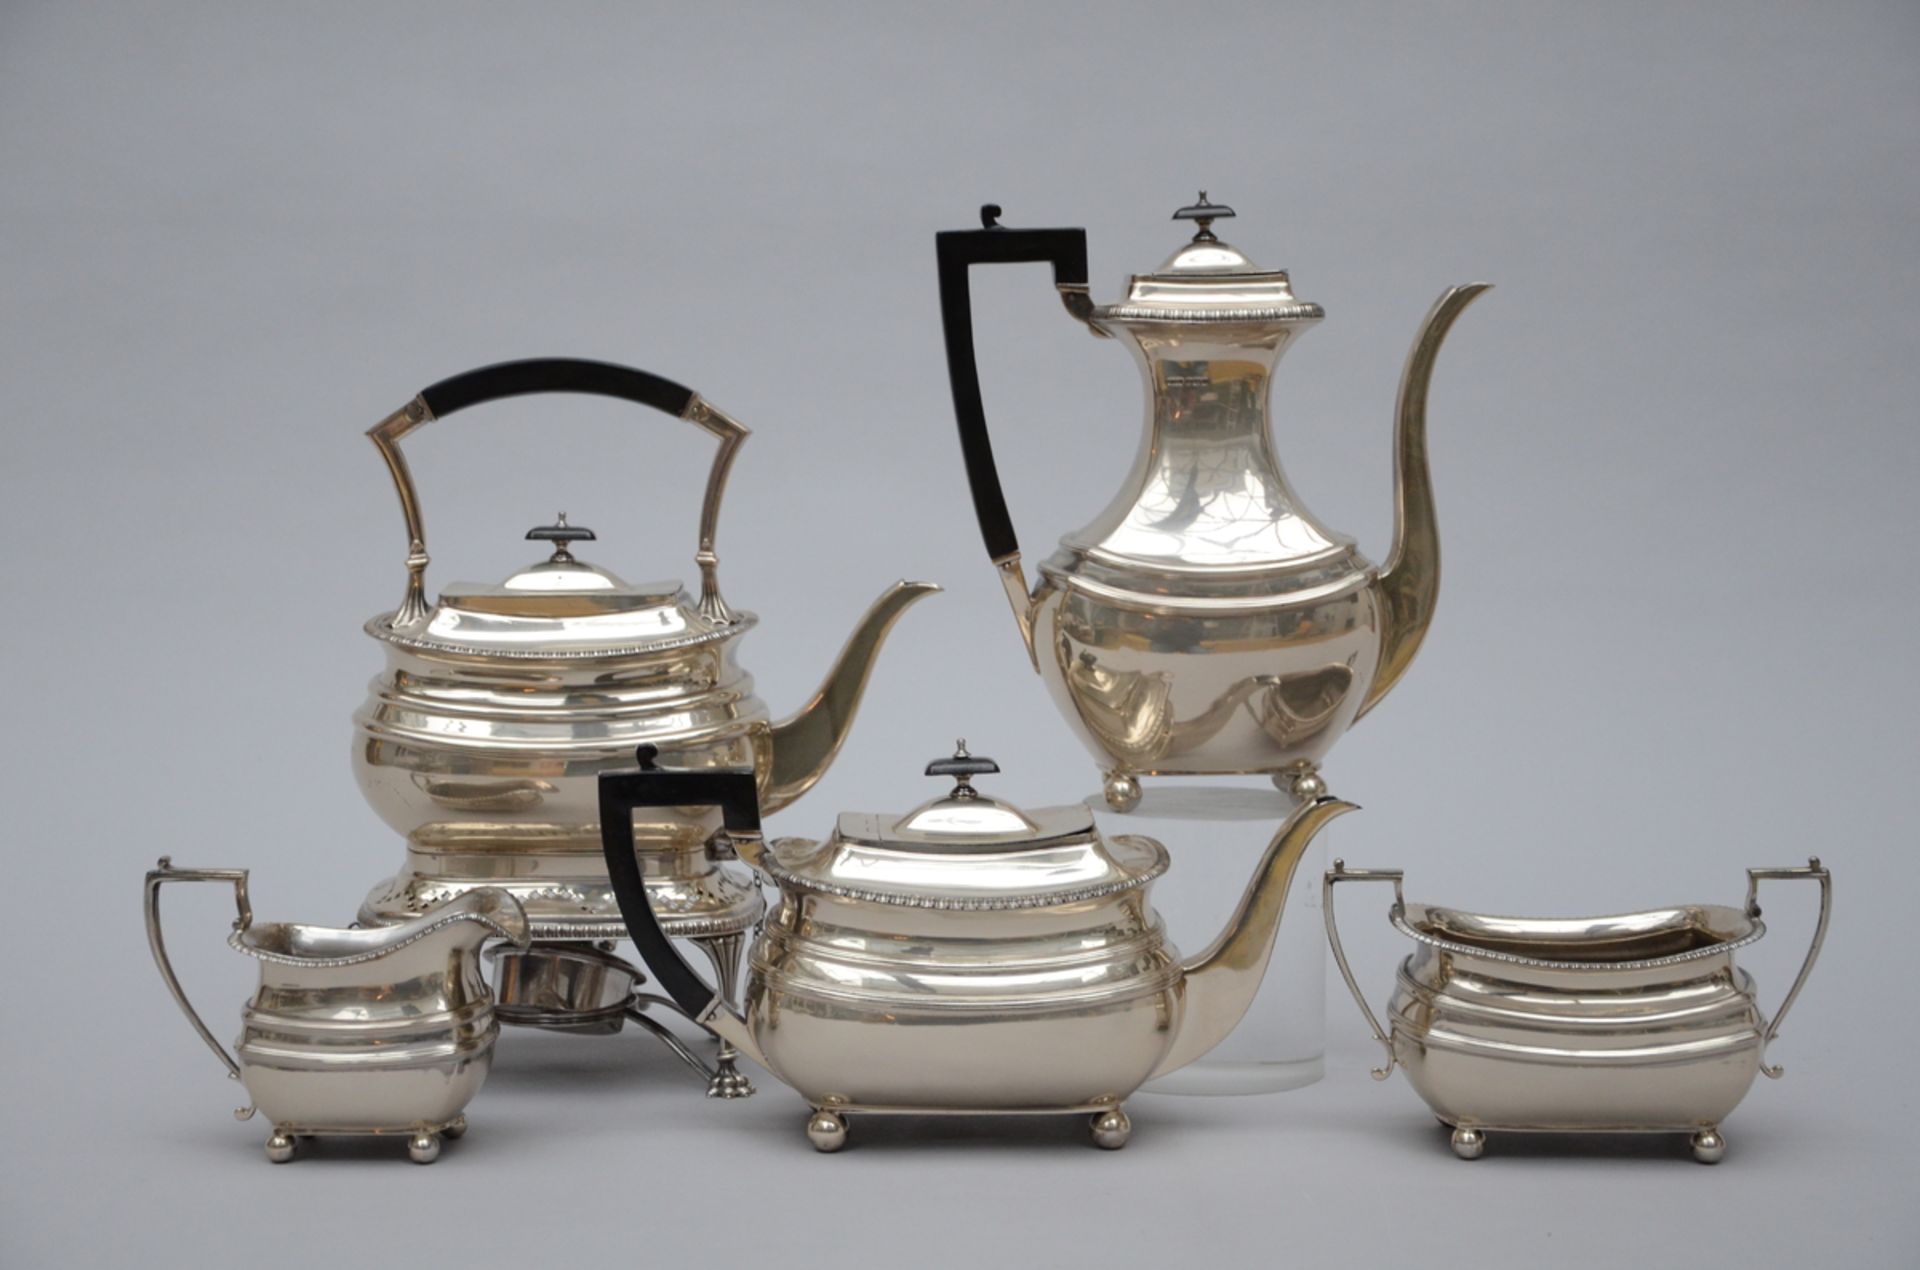 A five-piece coffee set in Sterling silver, United Kingdom